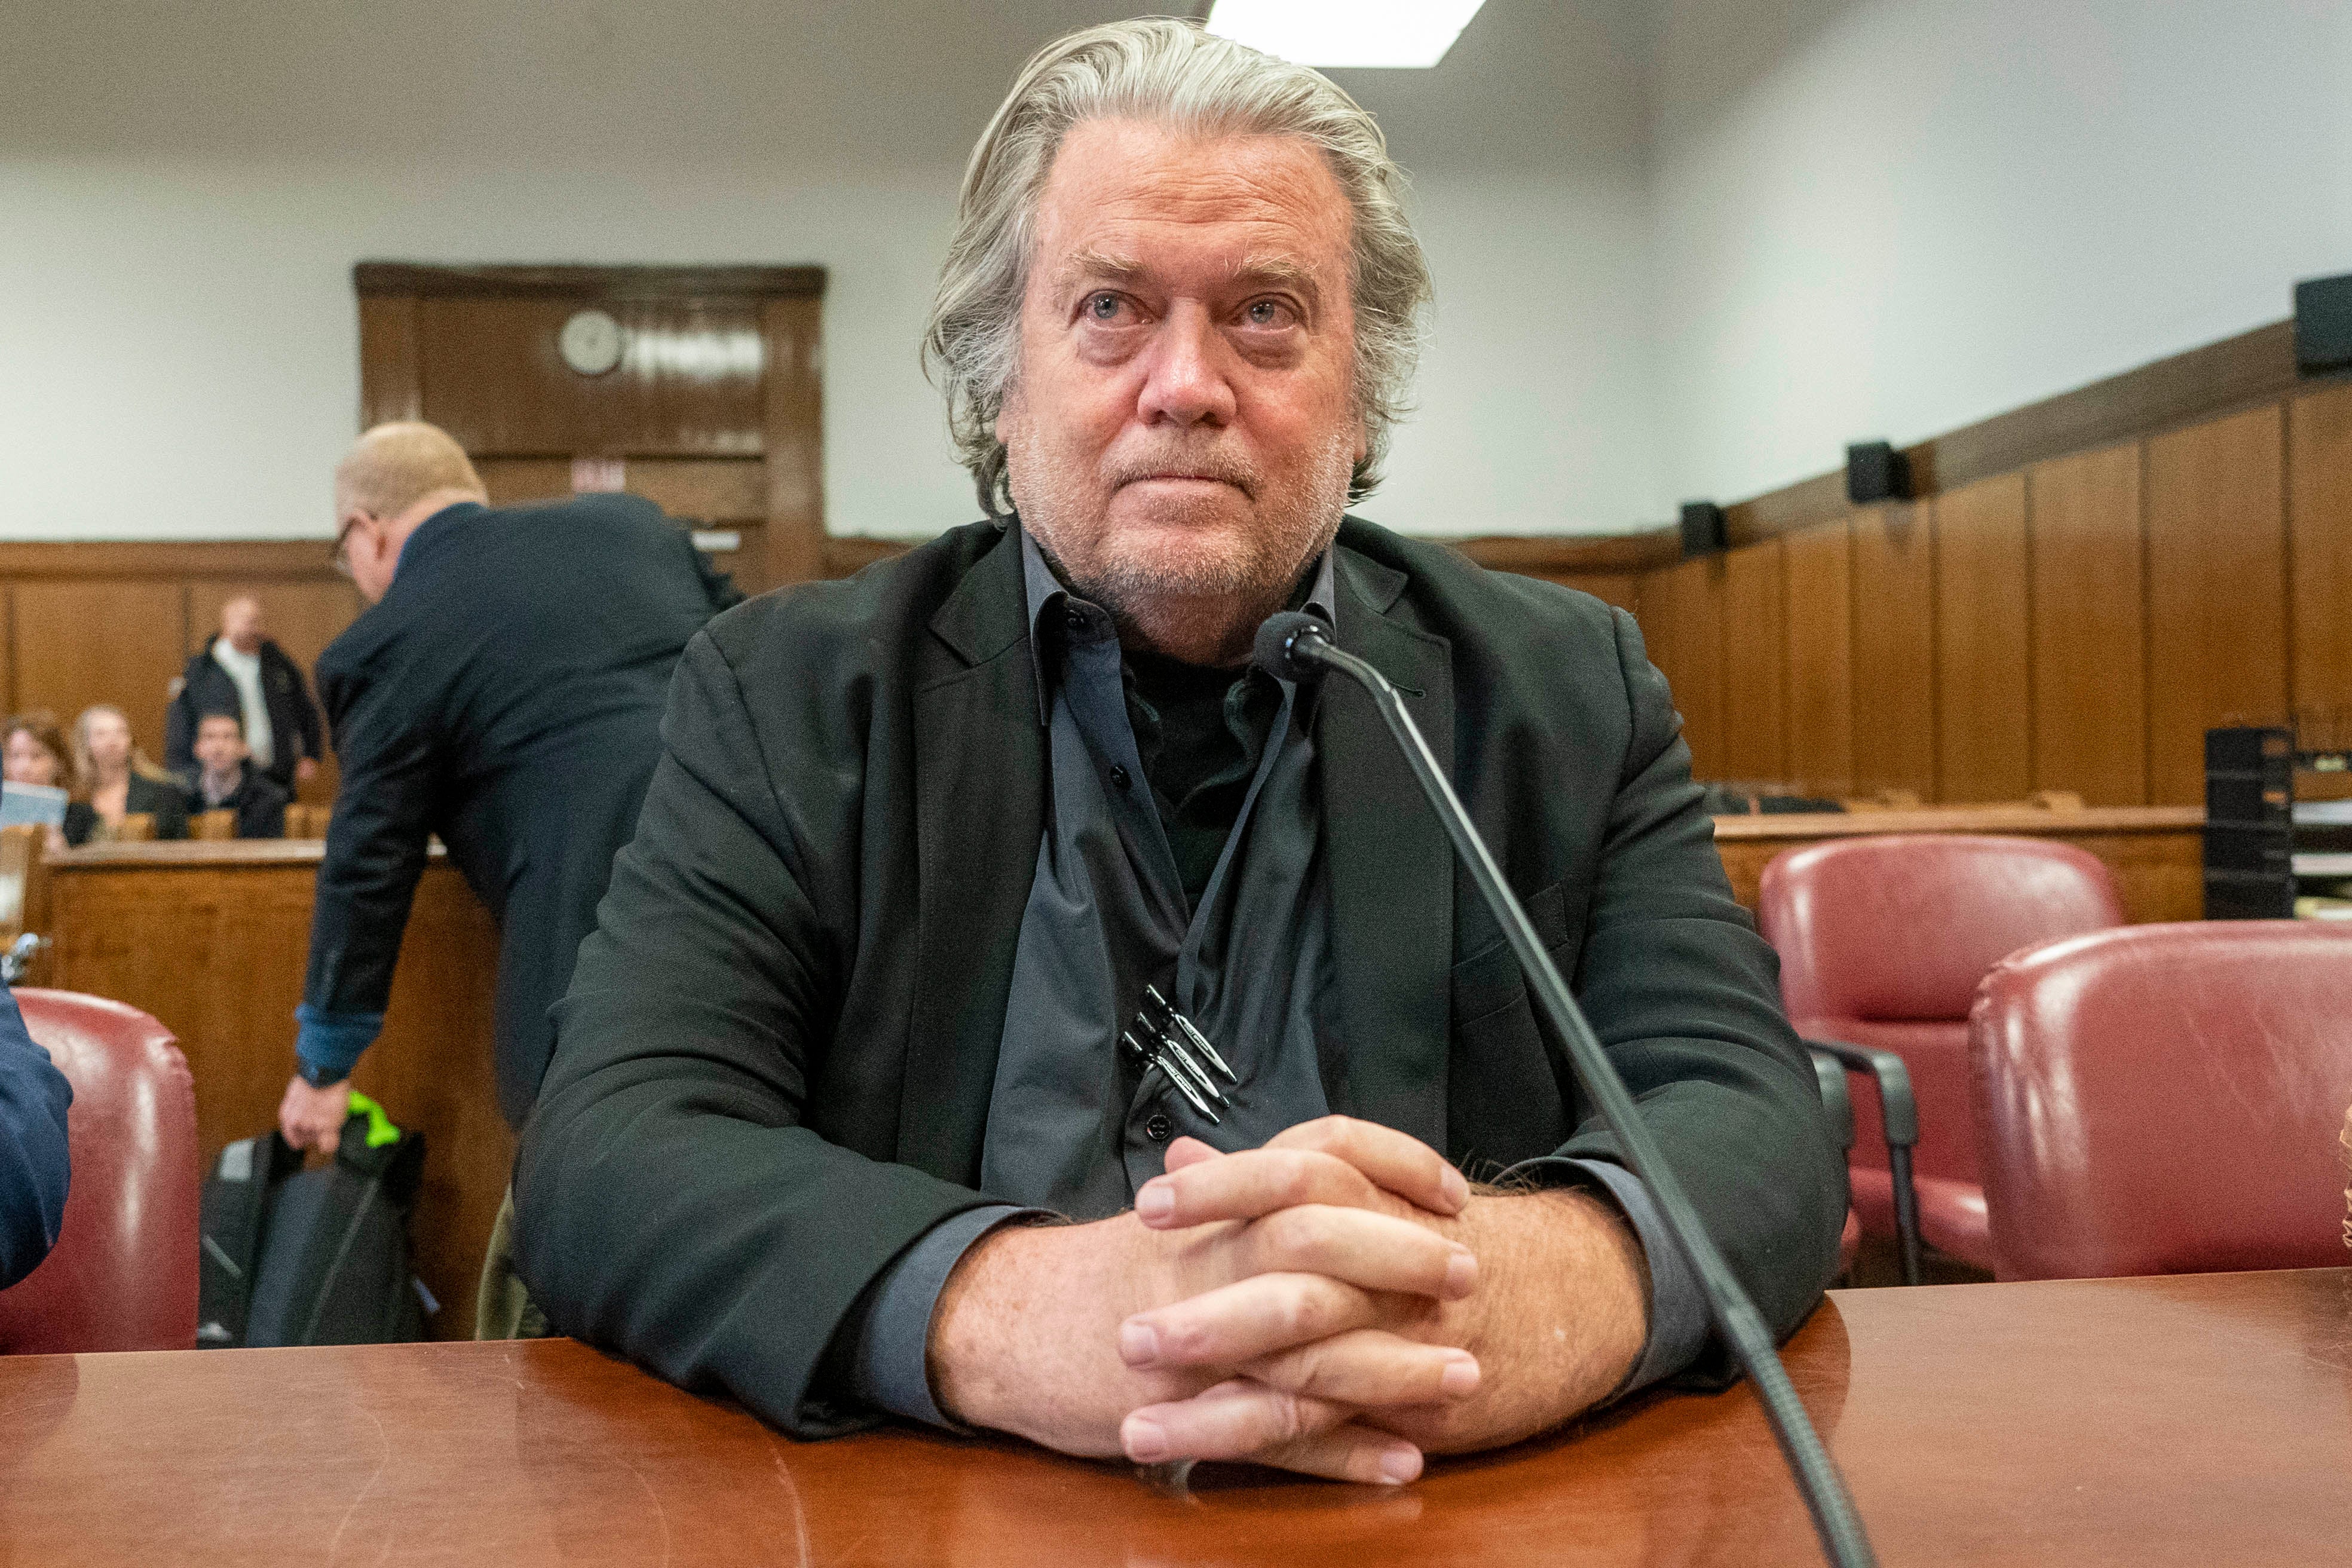 Prosecutors filed a motion asking a judge to reverse a stay on Steve Bannon’s prison sentence